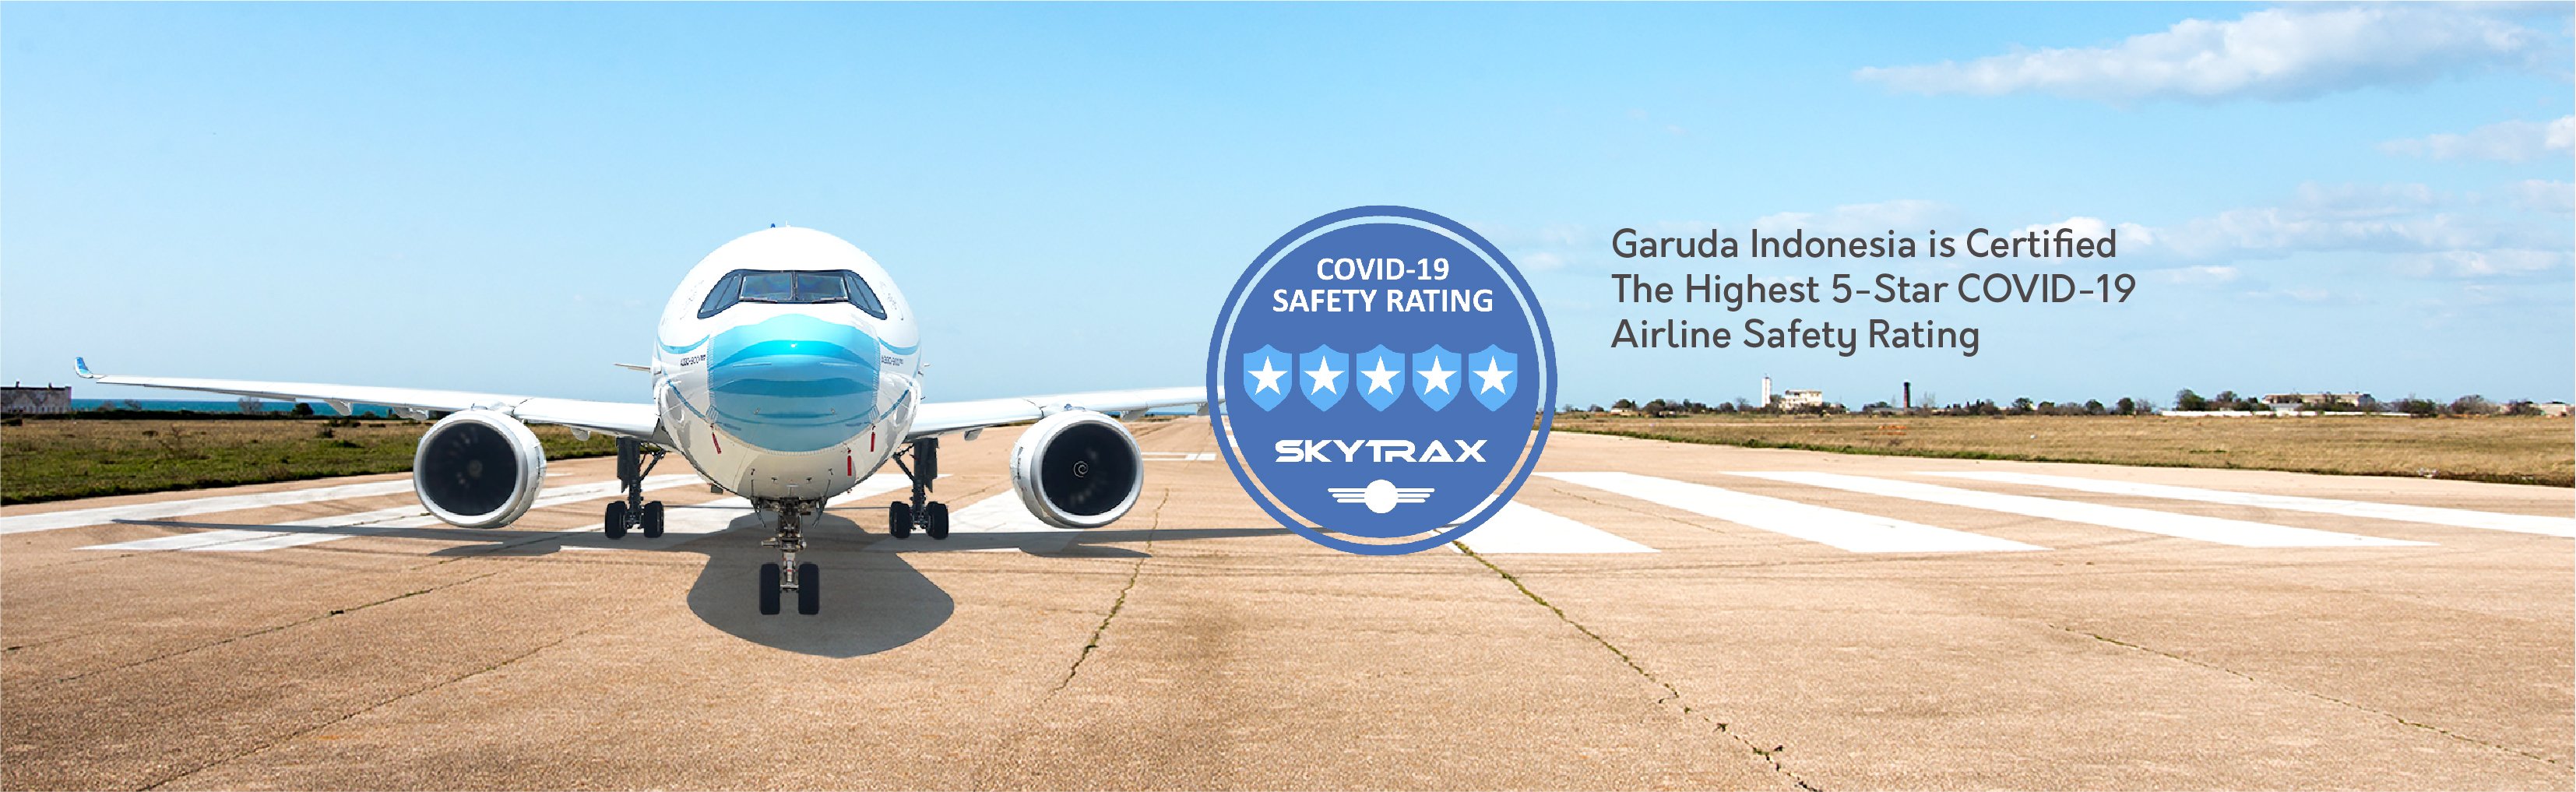 GARUDA INDONESIA RECEIVES THE HIGHEST 5-STAR COVID-19 AIRLINE SAFETY RATING FROM SKYTRAX